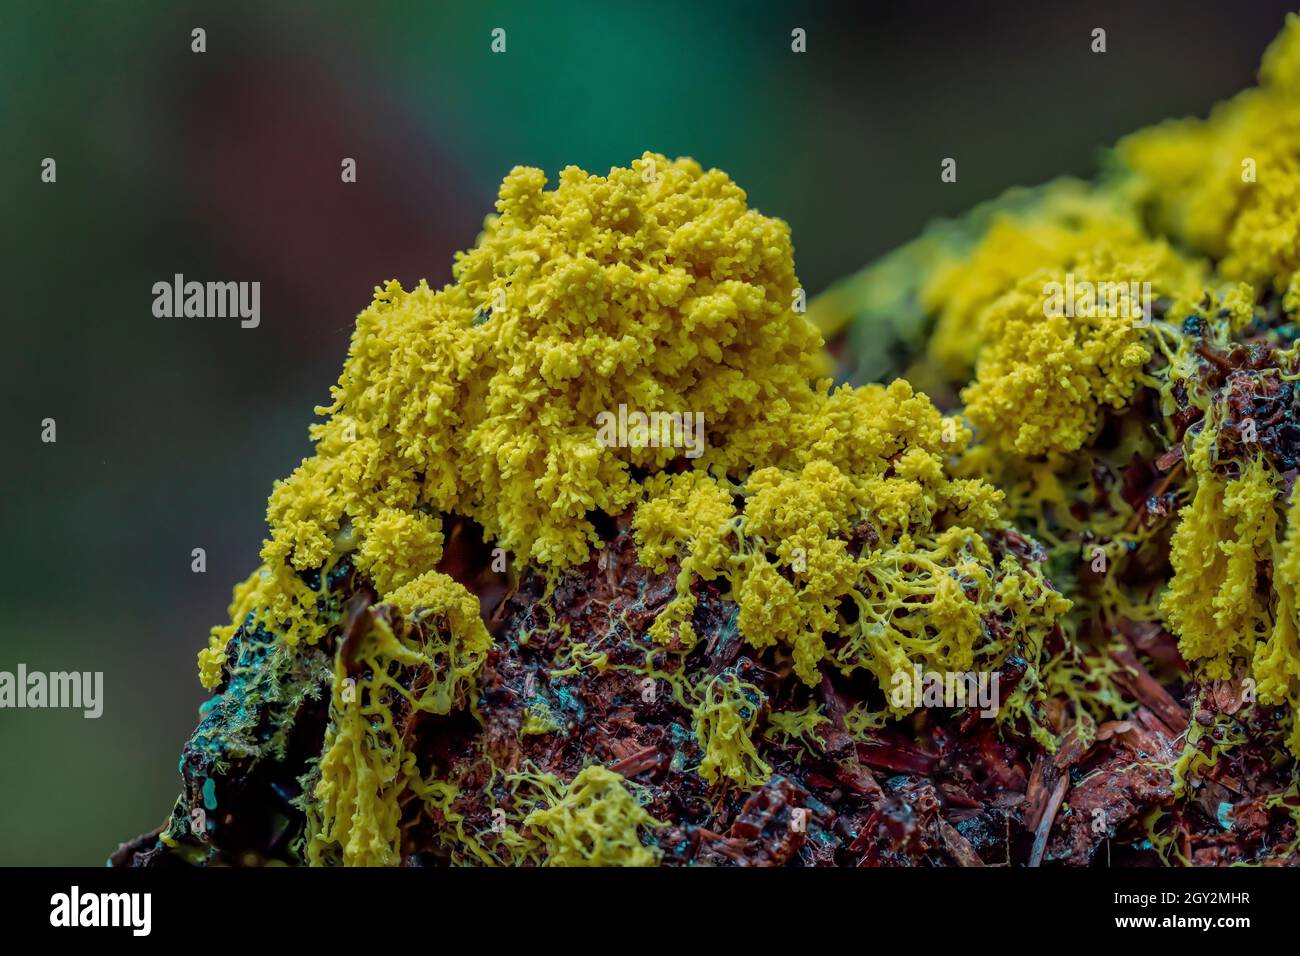 Dog Vomit Slime Mold, Fulito septica, moving along the forest floor at Staircase in Olympic National Park, Washington State, USA Stock Photo